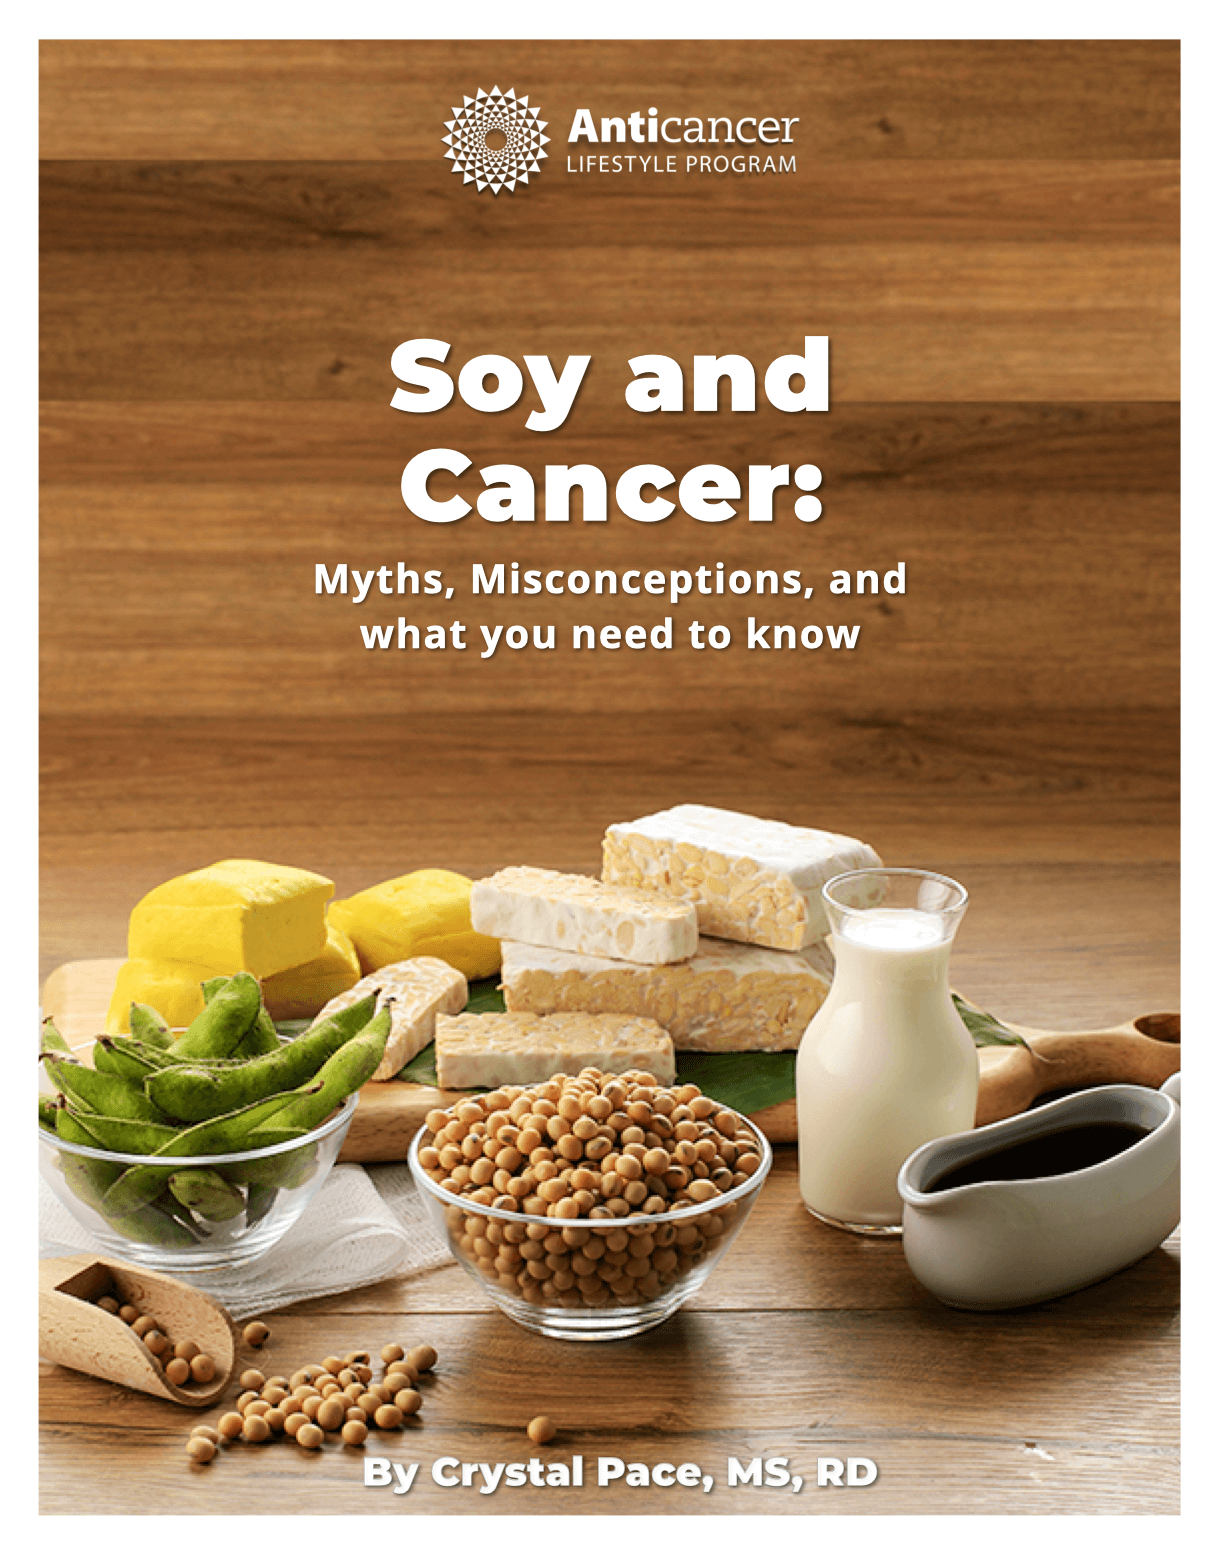 Soy and Cancer: Myths, Misconceptions, and What You Need to Know